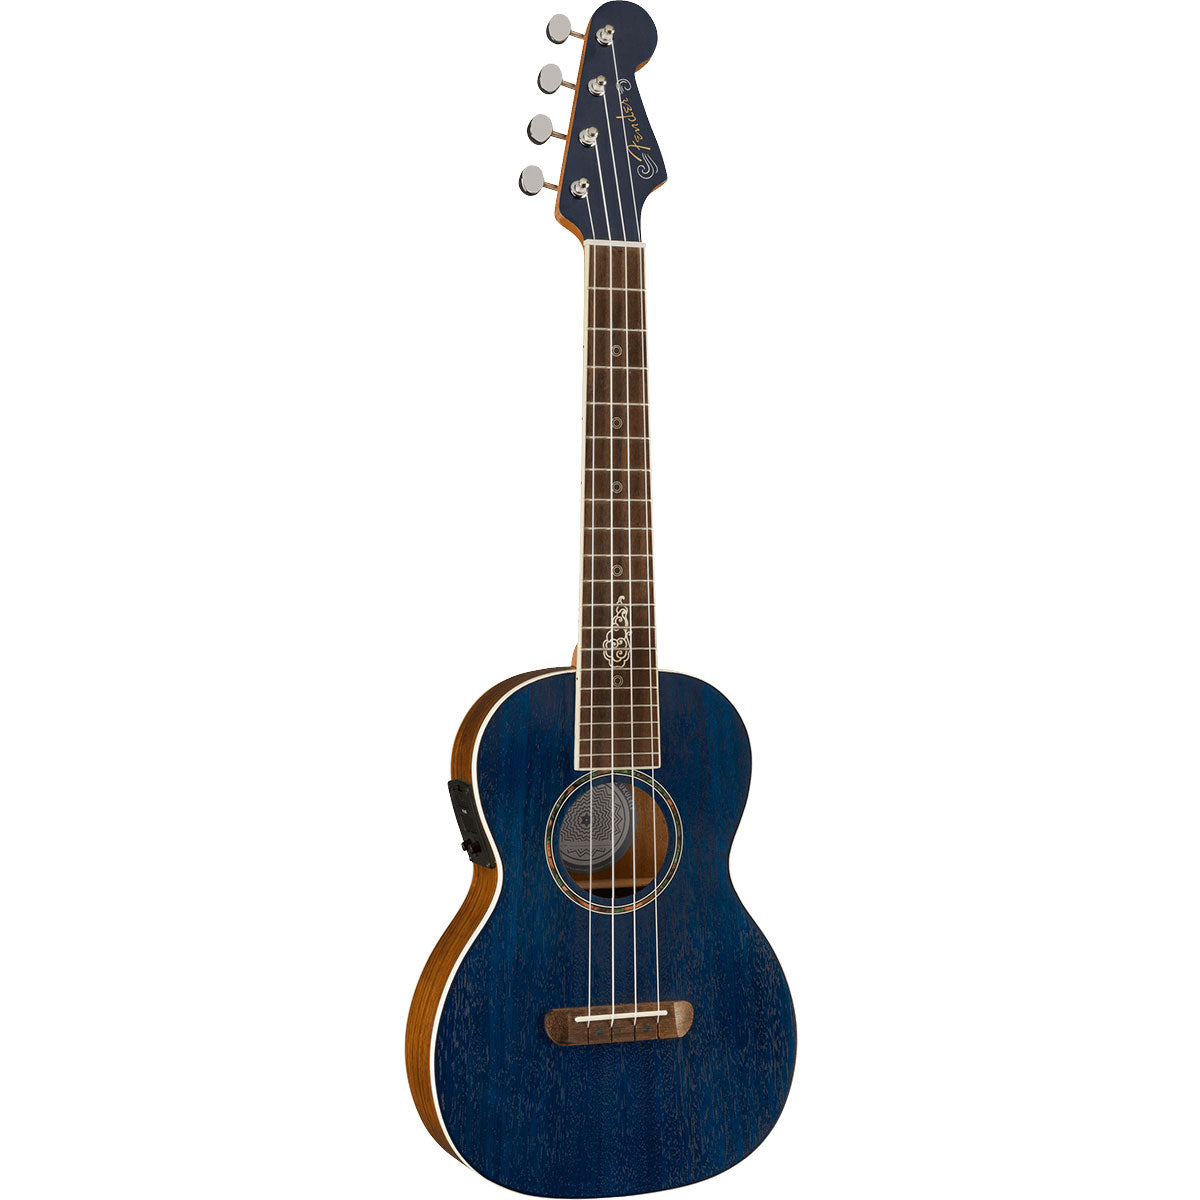 Perspective view of Fender Dhani Harrison Signature Ukulele - Sapphire Blue showing top and left side